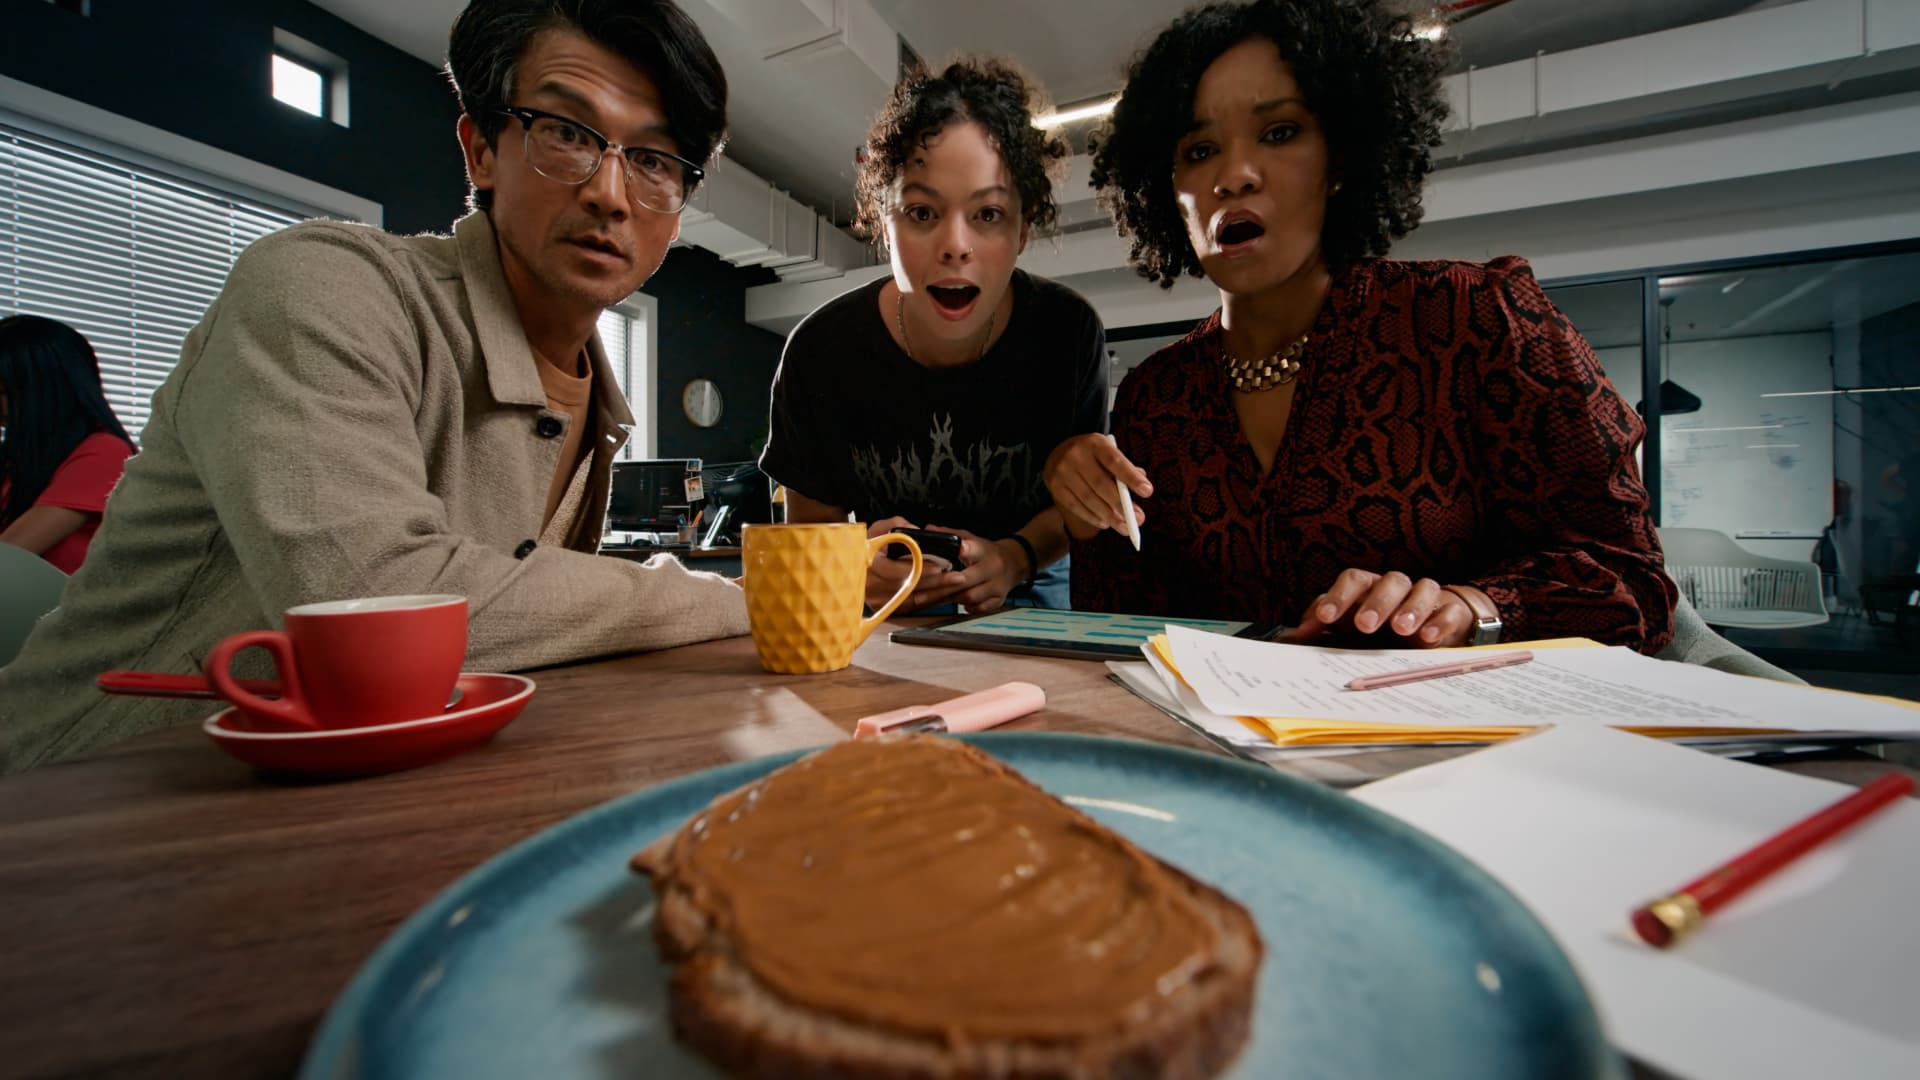 Lotus Biscoff launches new global campaign and introduces a tasty POV